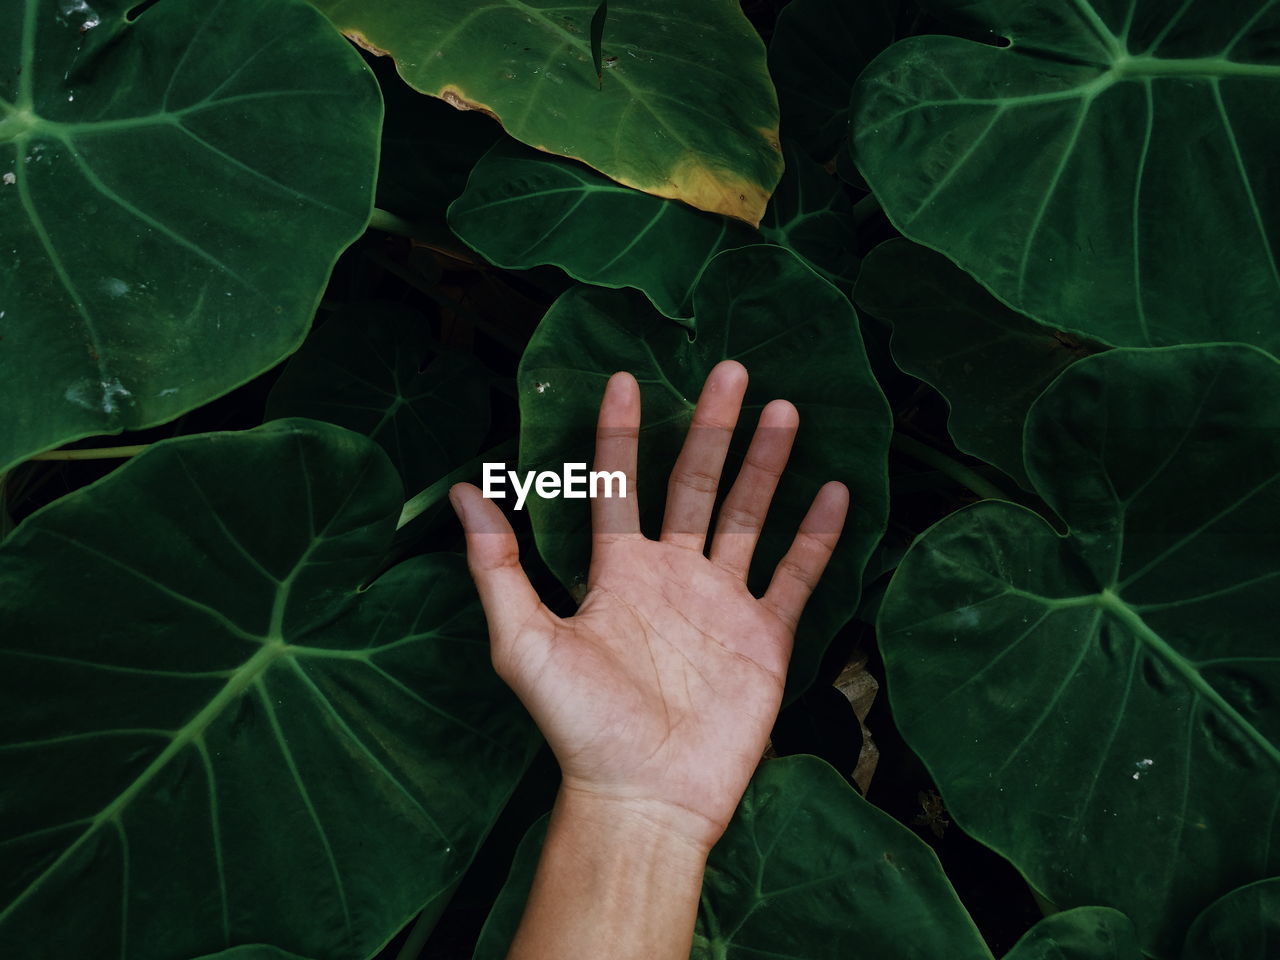 Cropped hand of person amidst green leaves